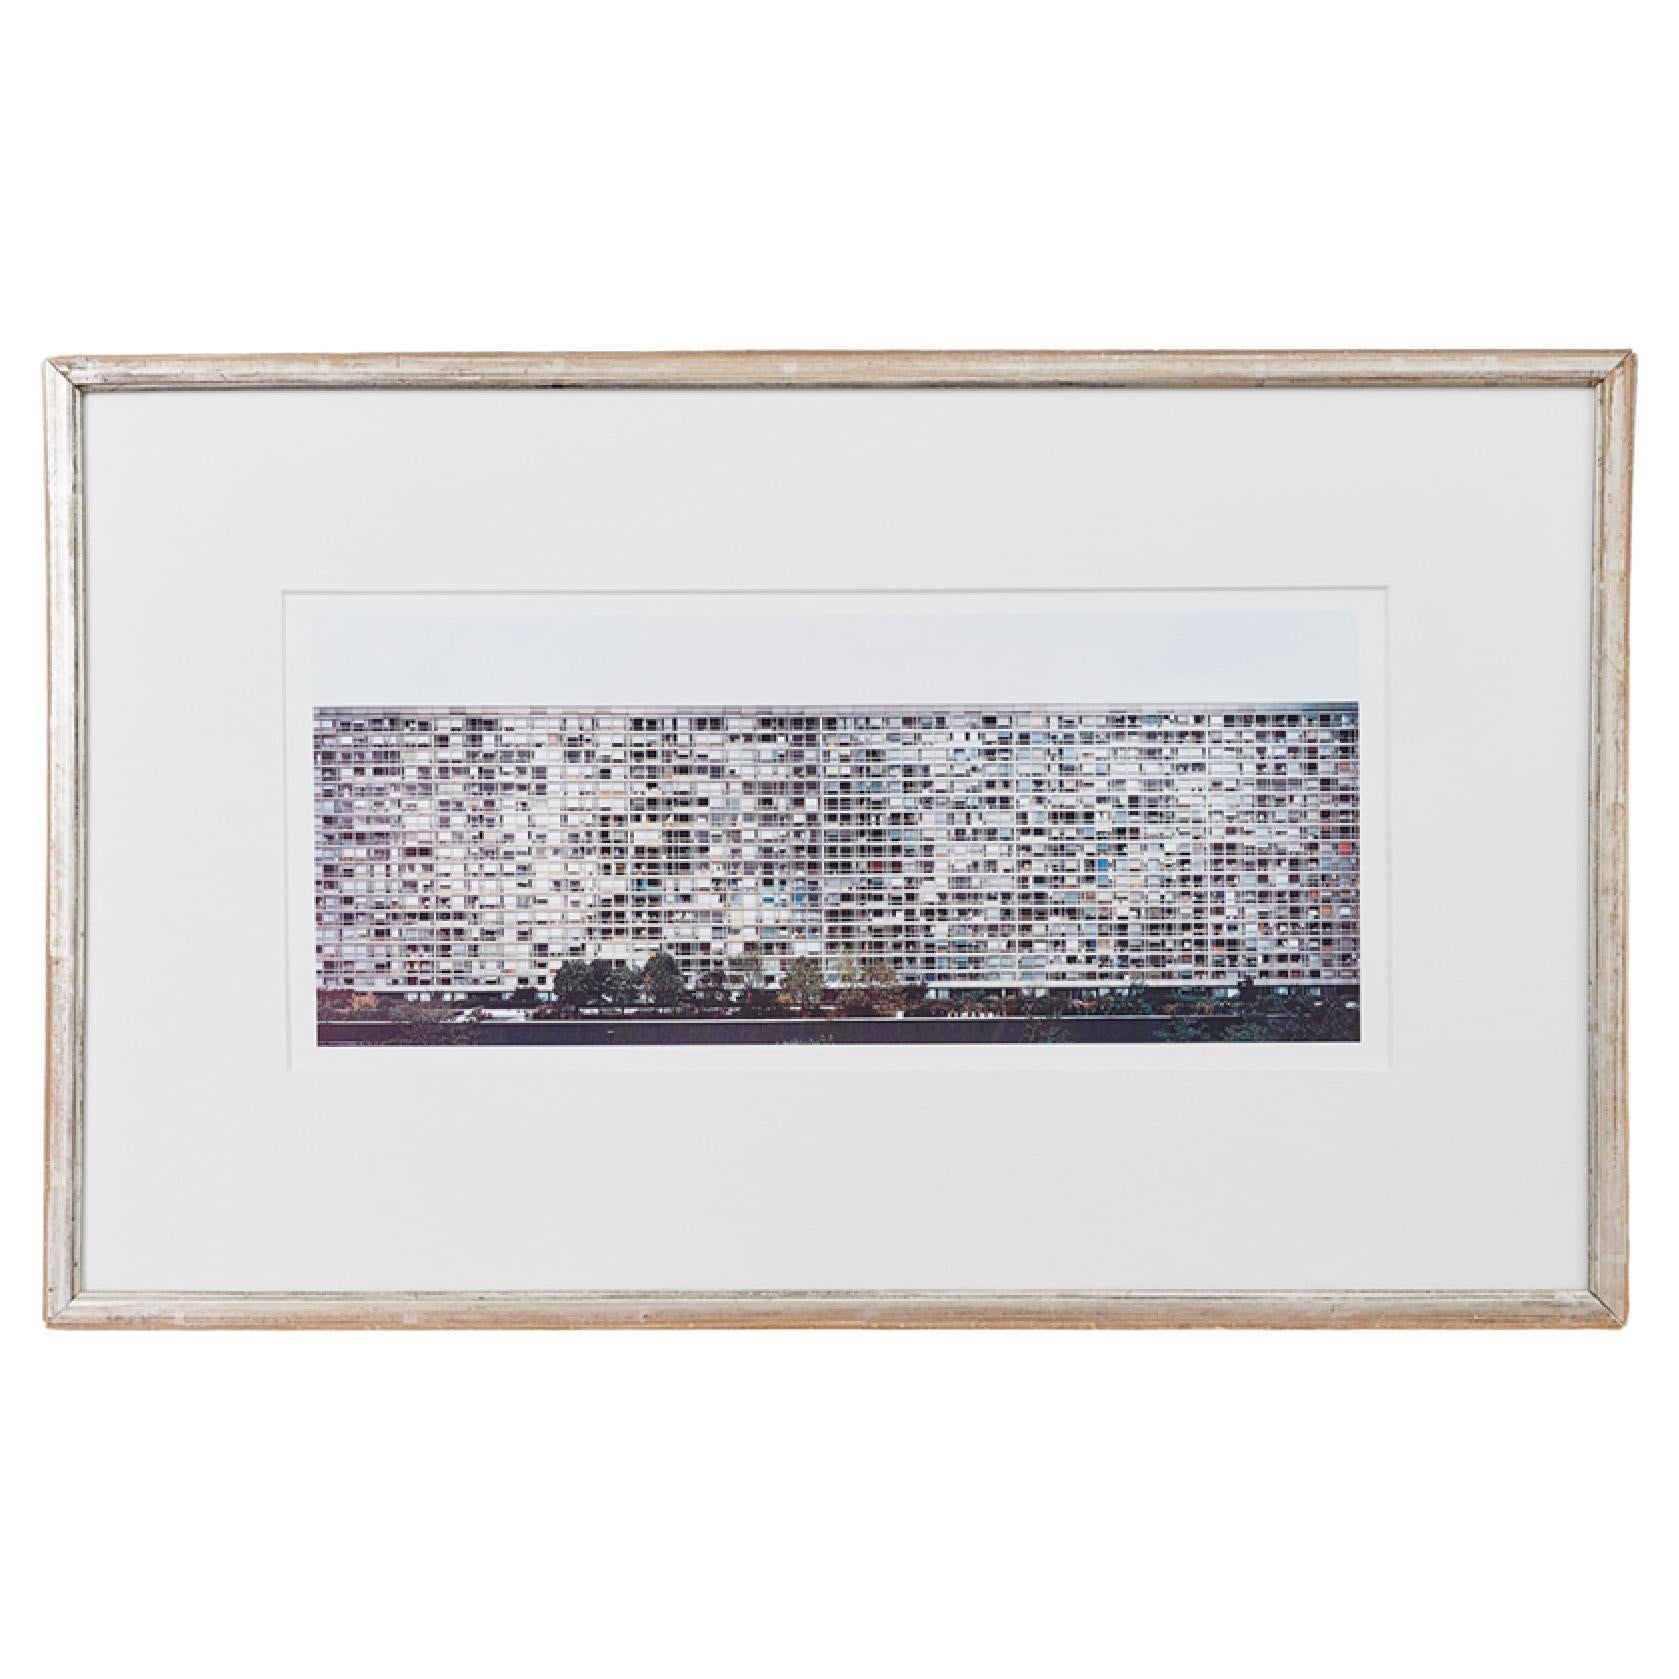 Vintage Andreas Gursky “Montparnasse” Lithograph, Signed, Germany, 1995